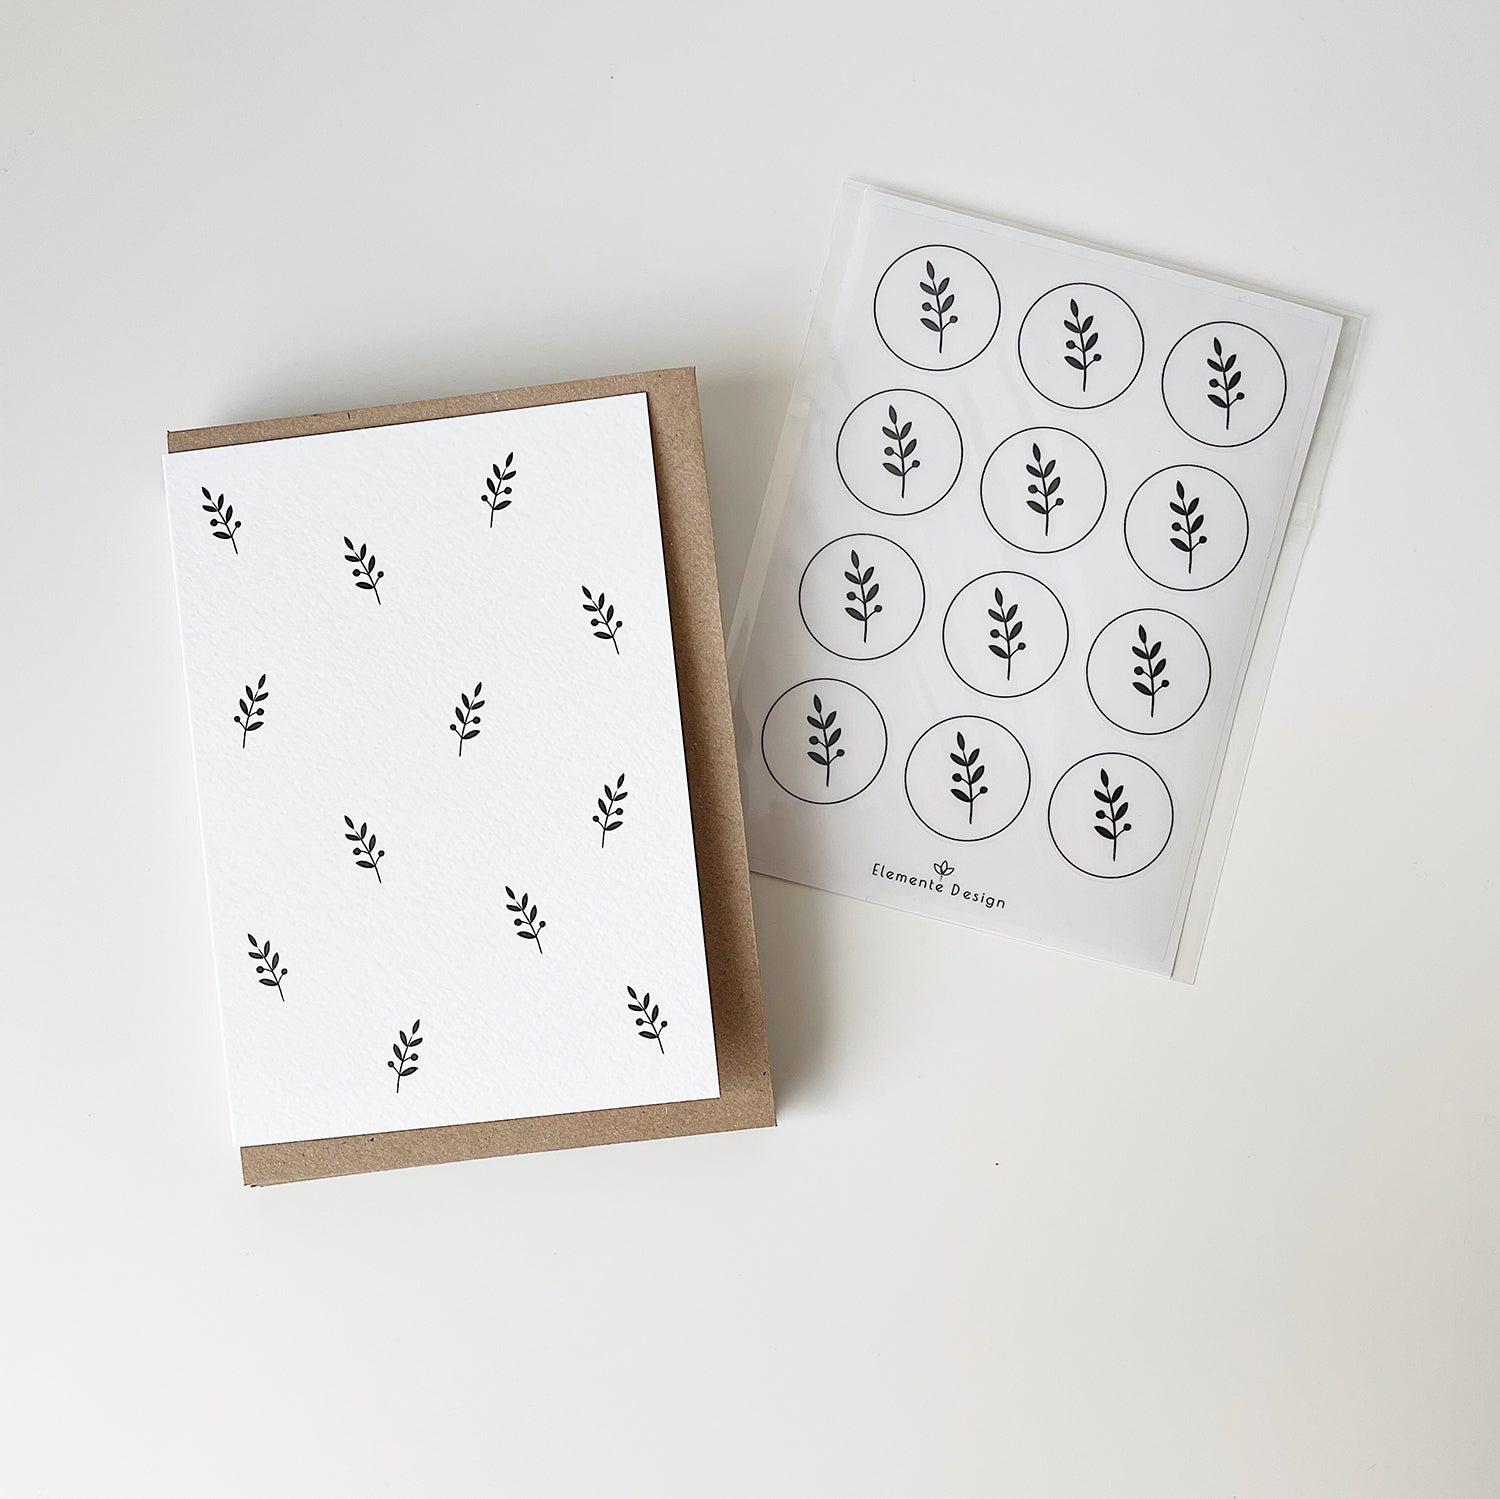 stationery set of greeting cards and aesthetic stickers elemente design